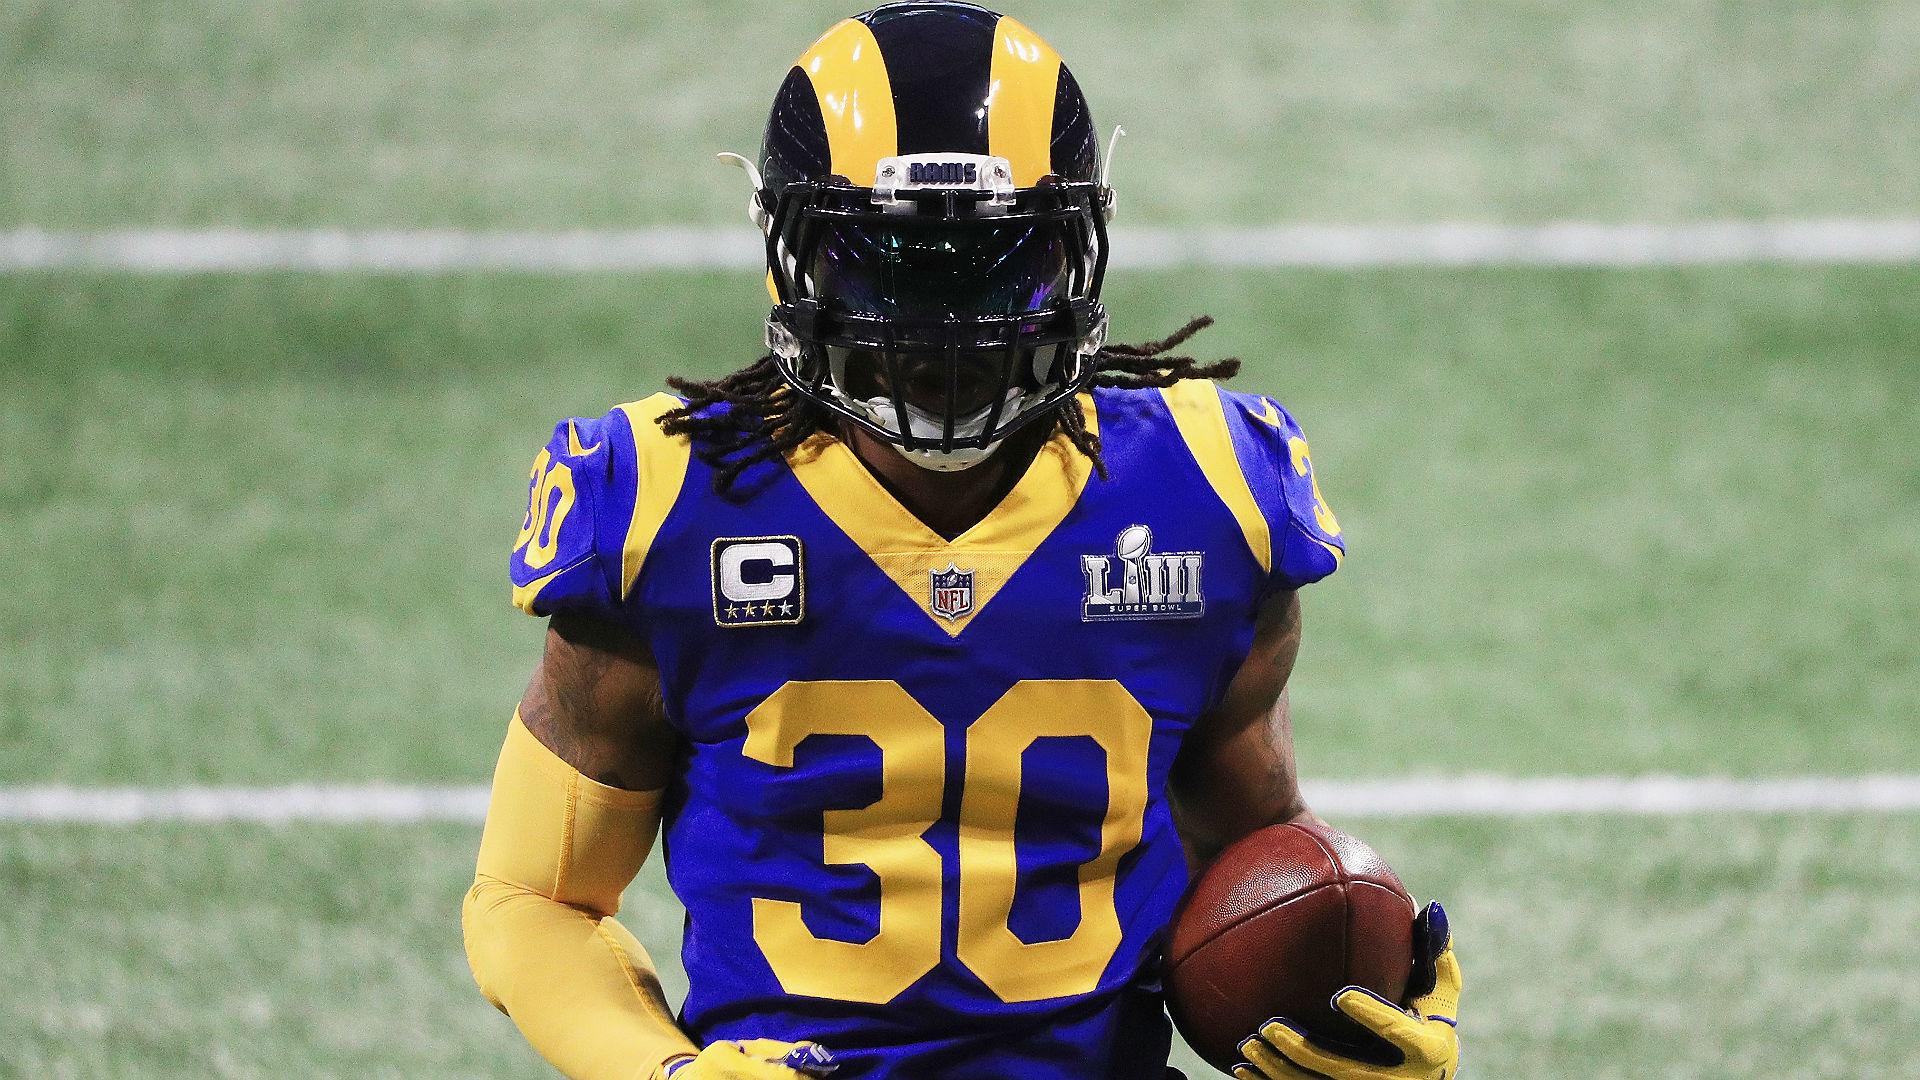 Todd Gurley injury update: Trainer confirms 'arthritic